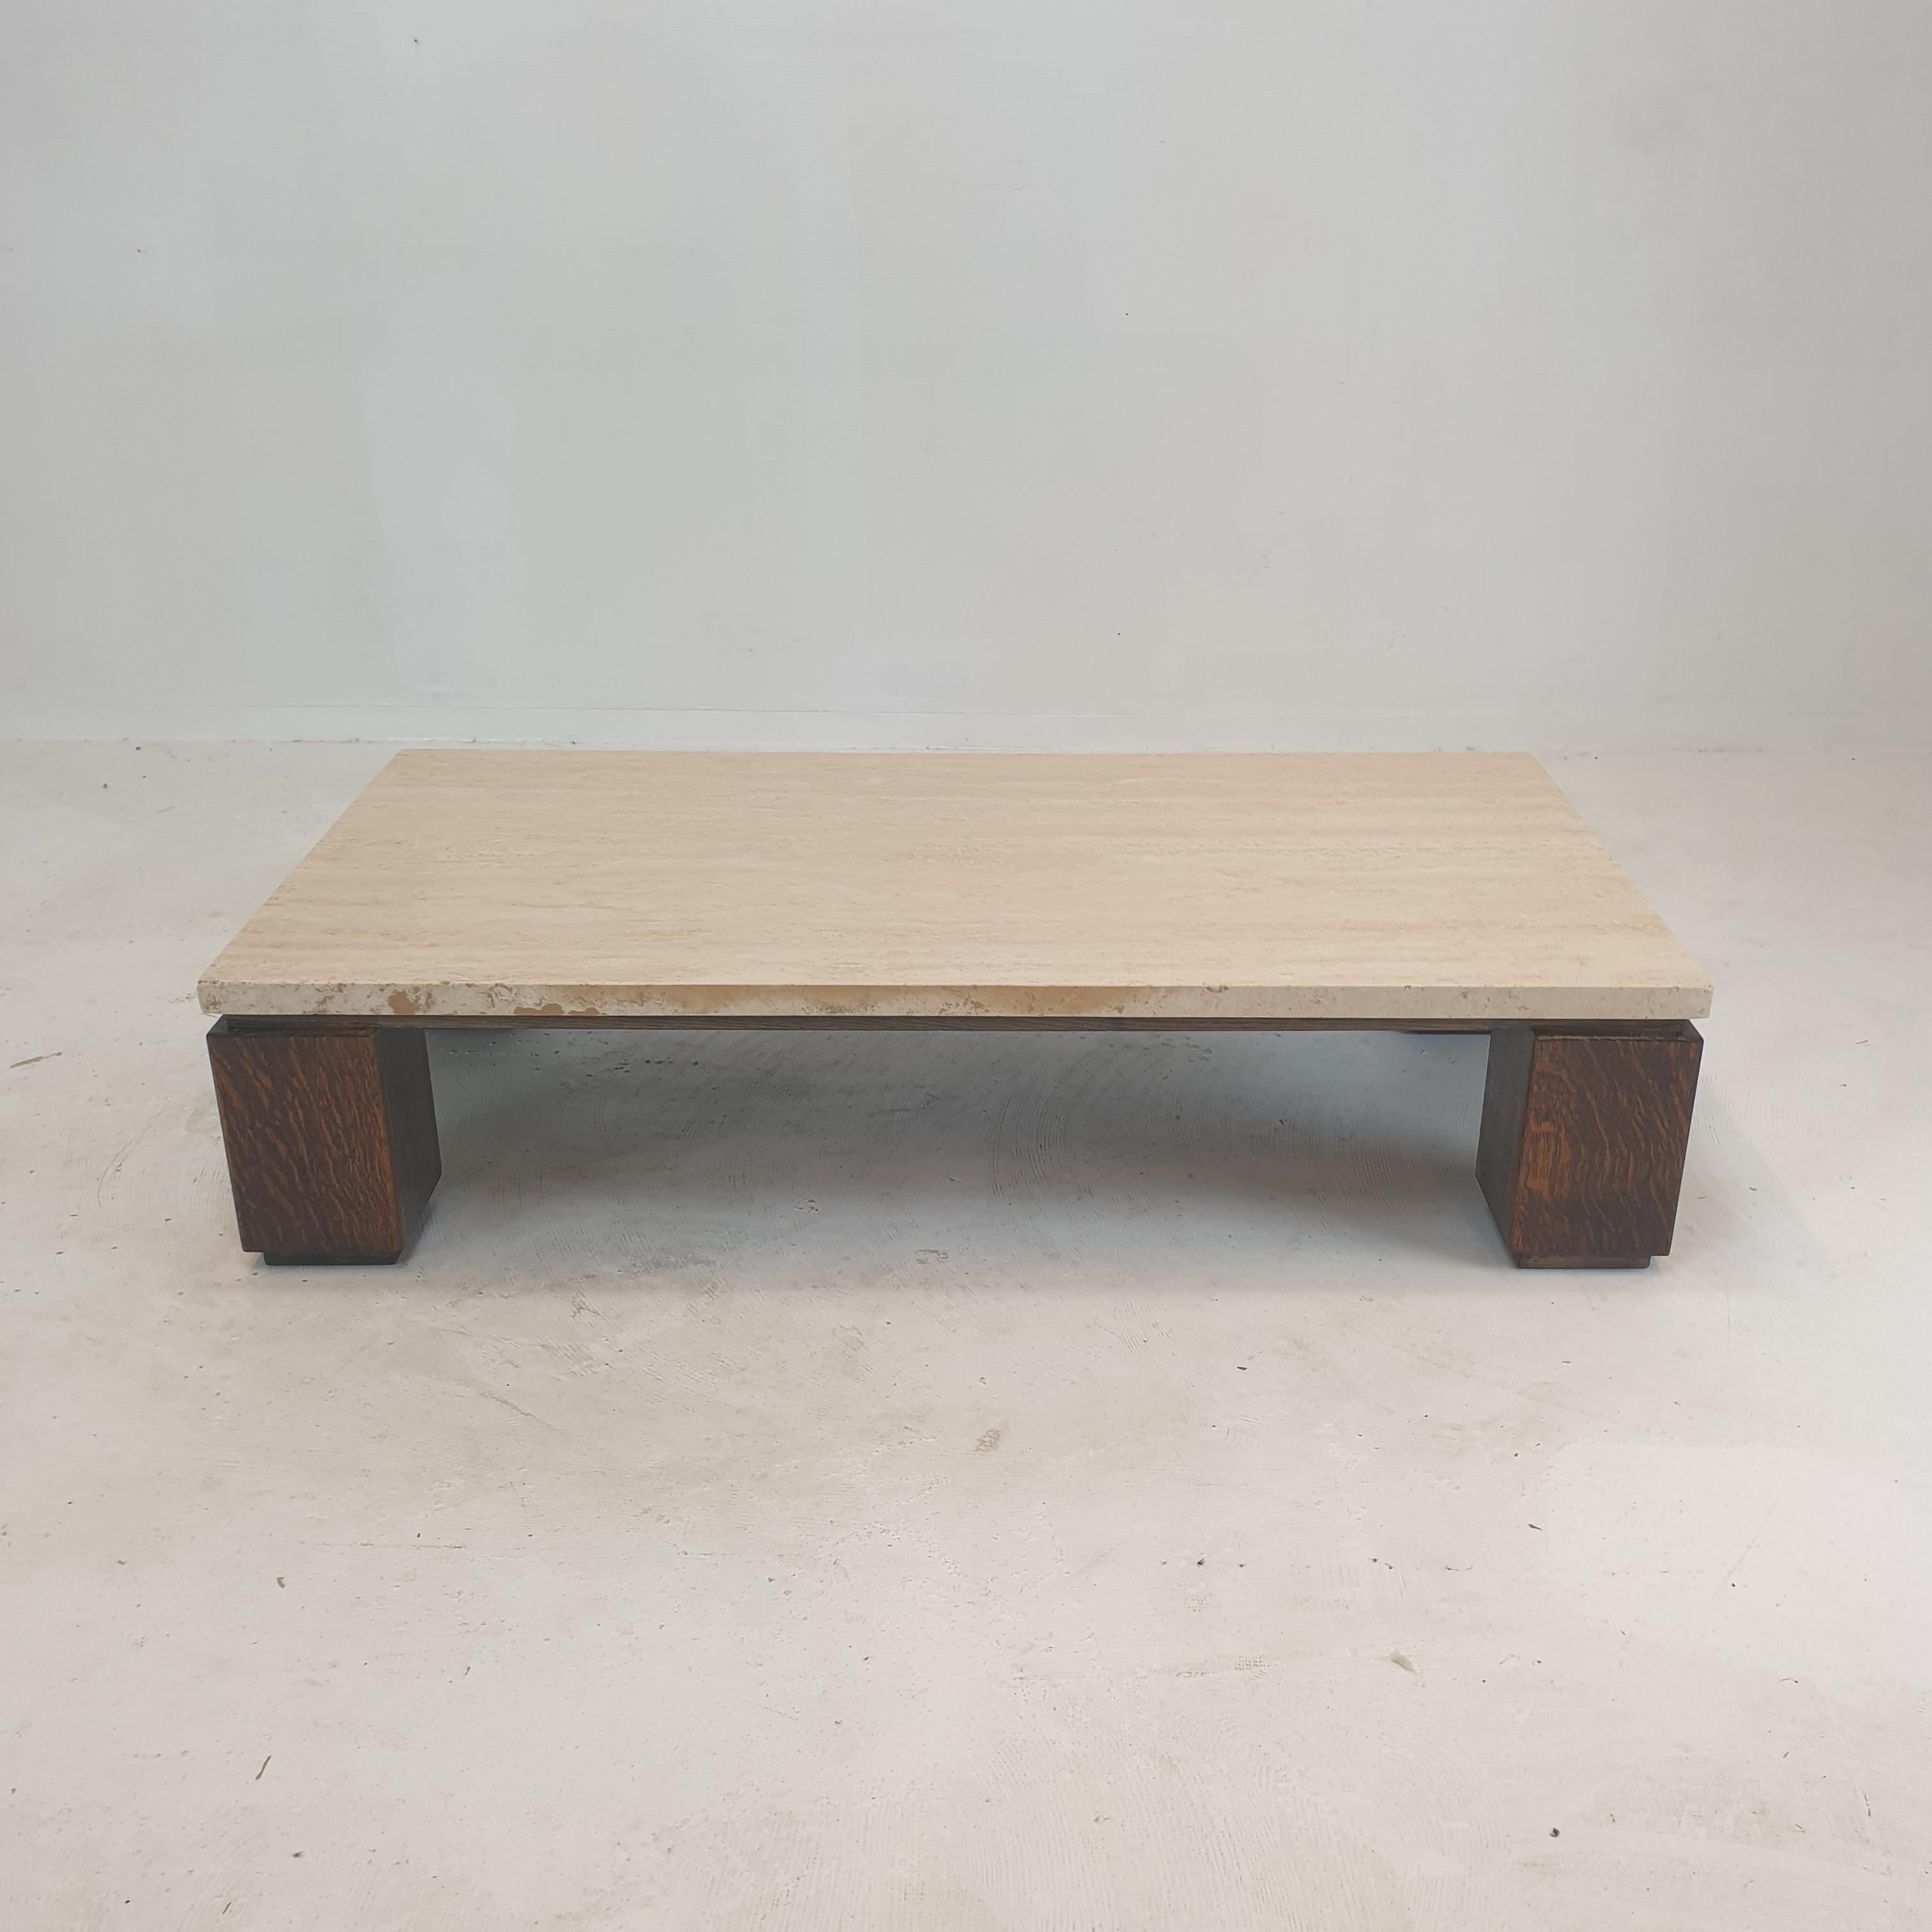 Very nice coffee table from the 70's.
Fabricated in Italy.

The beautiful travertine plate with the Wengé frame makes a stunning combination.

We work with professional packers and shippers, we can ship worldwide in 5 to 10 days.